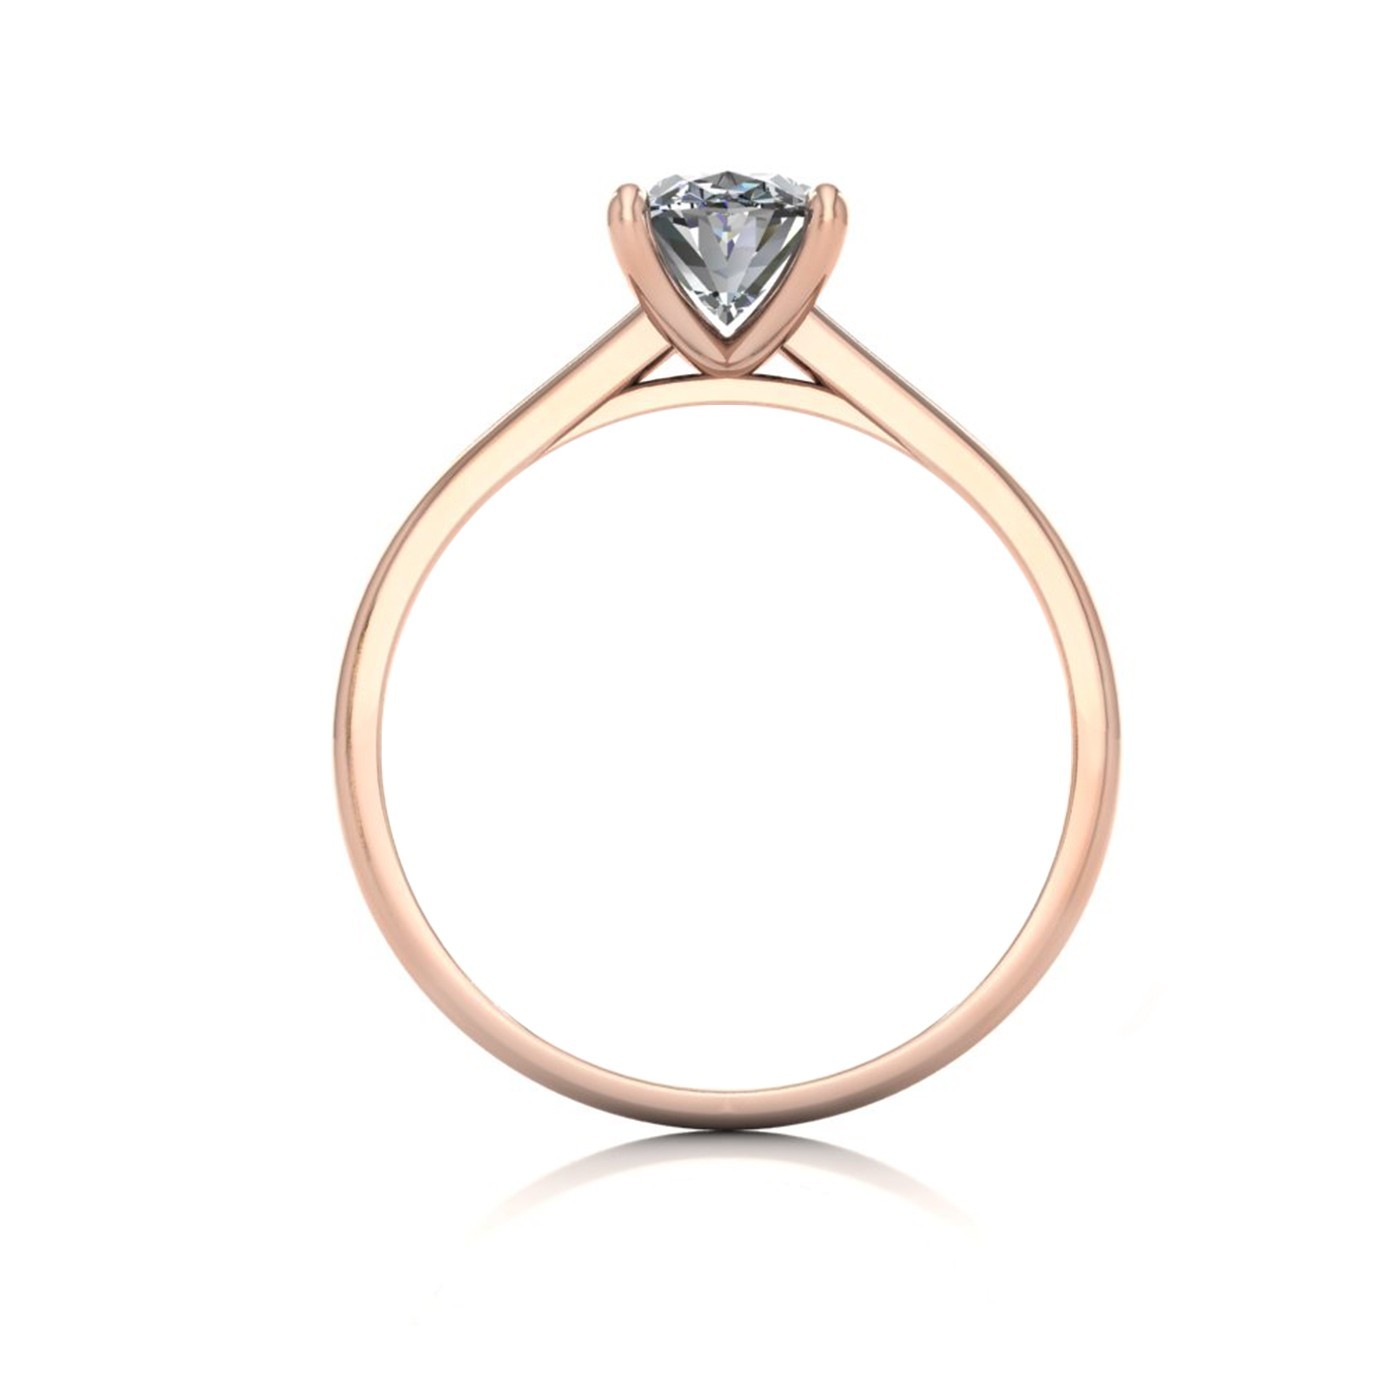 18K ROSE GOLD 4 PRONGS SOLITAIRE OVAL CUT DIAMOND ENGAGEMENT RING WITH WHISPER THIN BAND